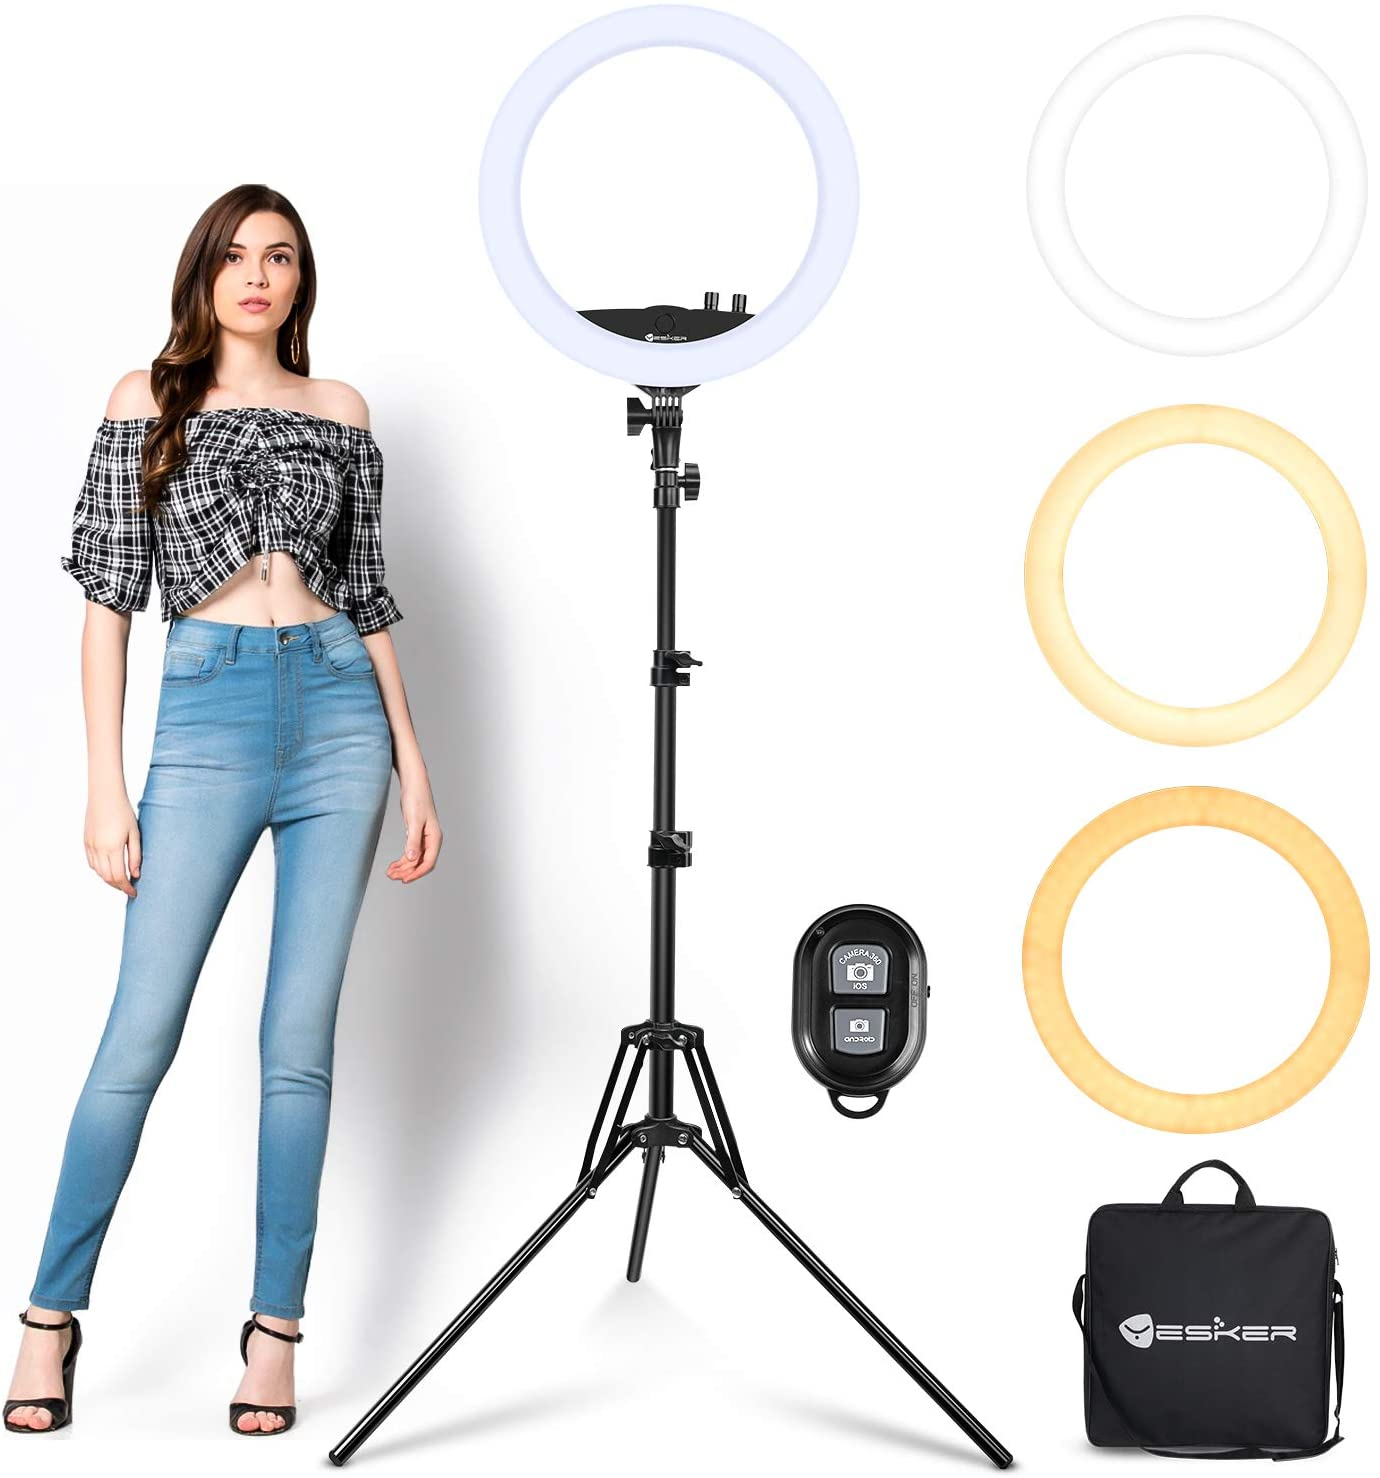 What is a Ring Light & How to Use it - Adorama Learning Center